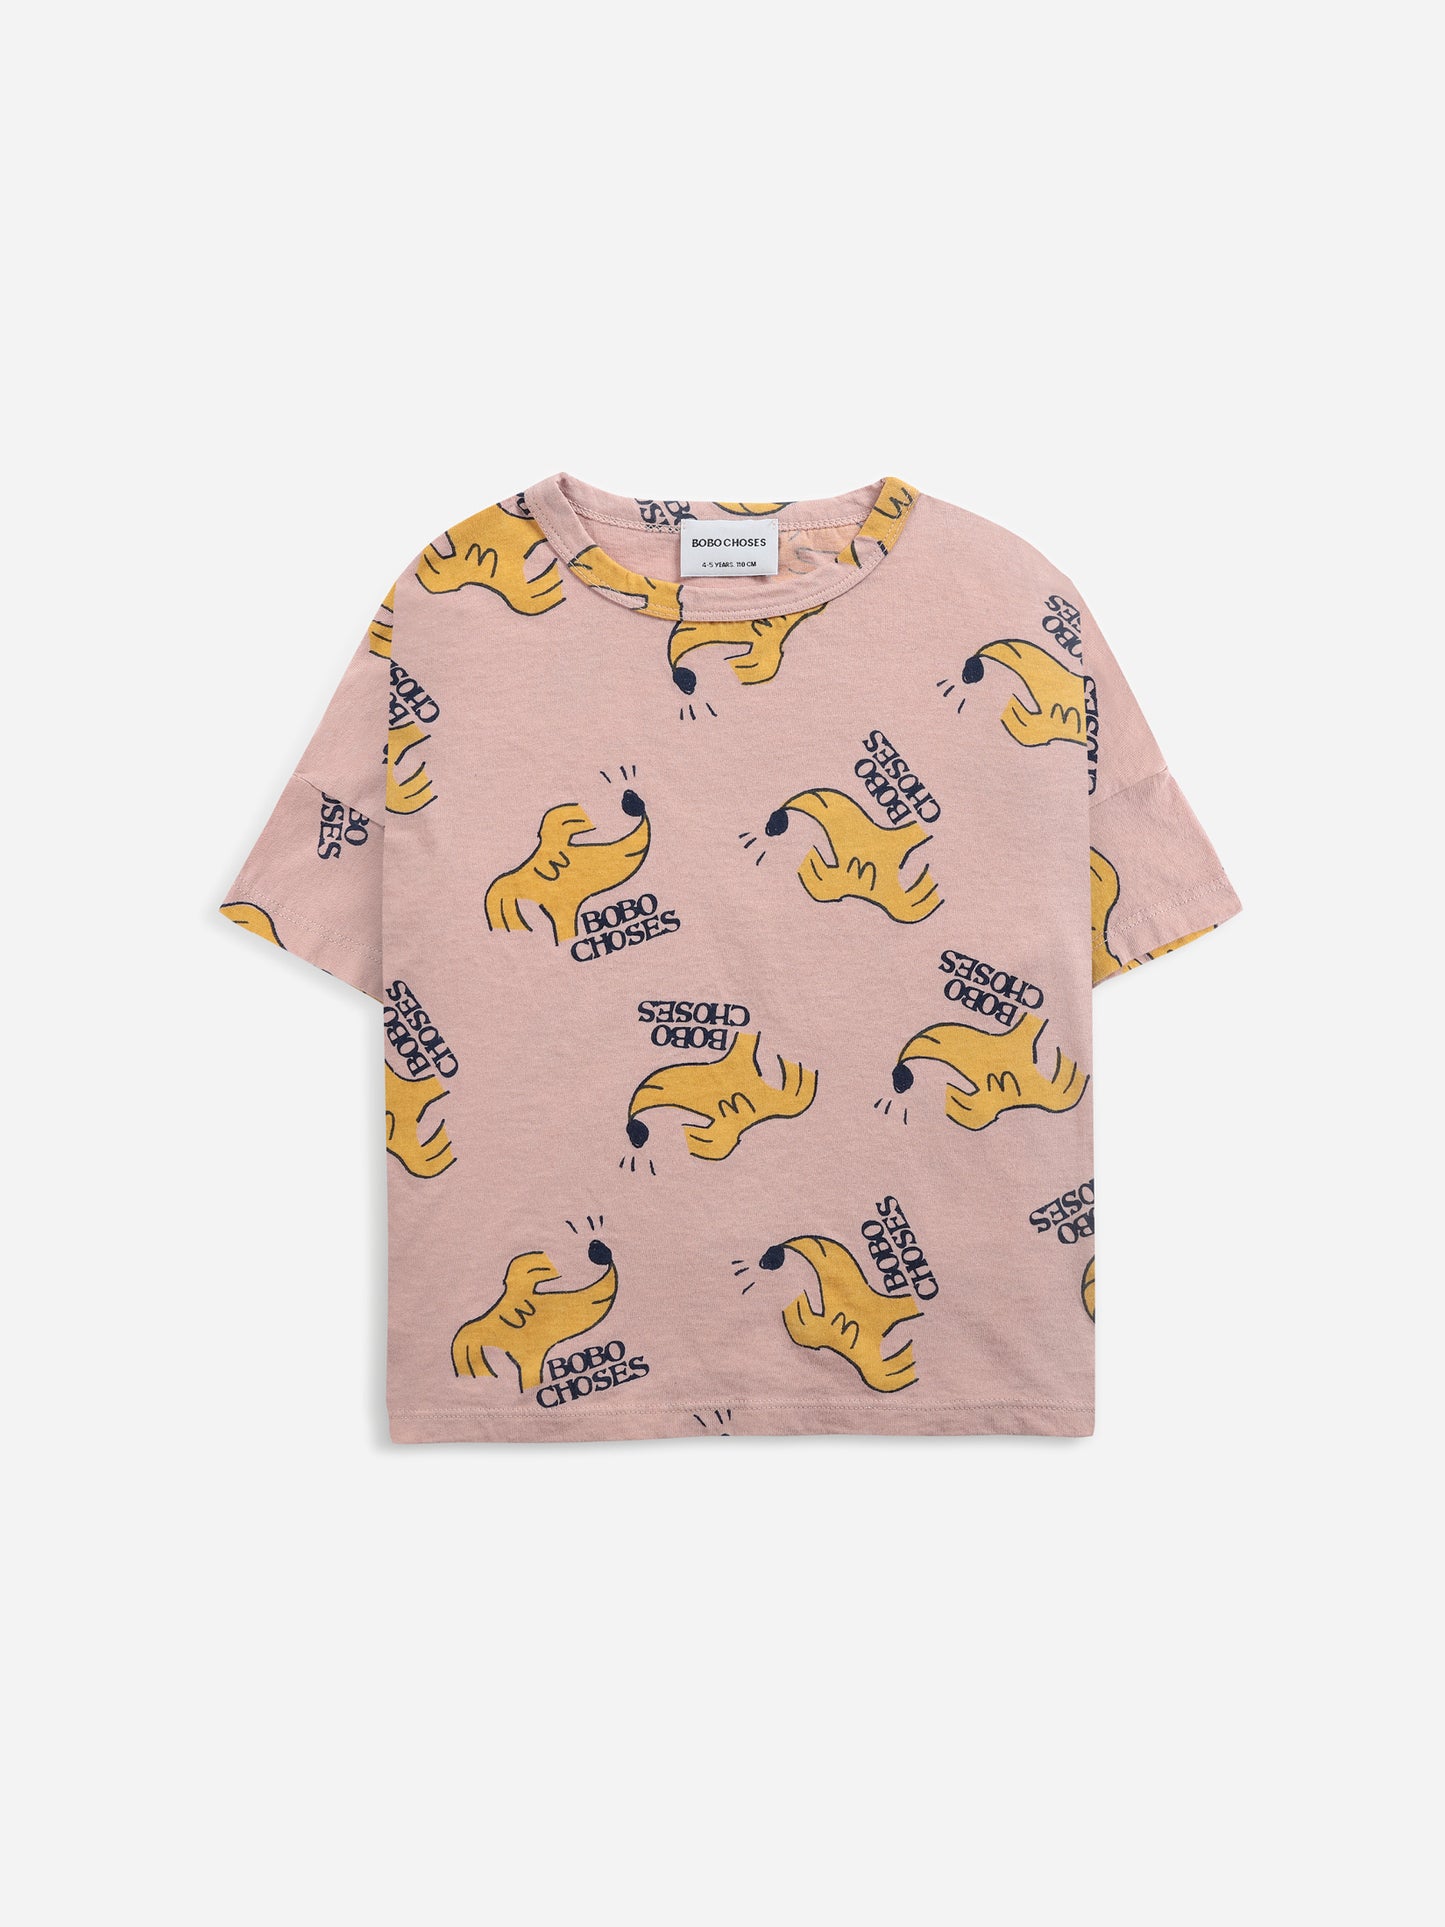 Sniffy Dog All Over Short Sleeve T-Shirt